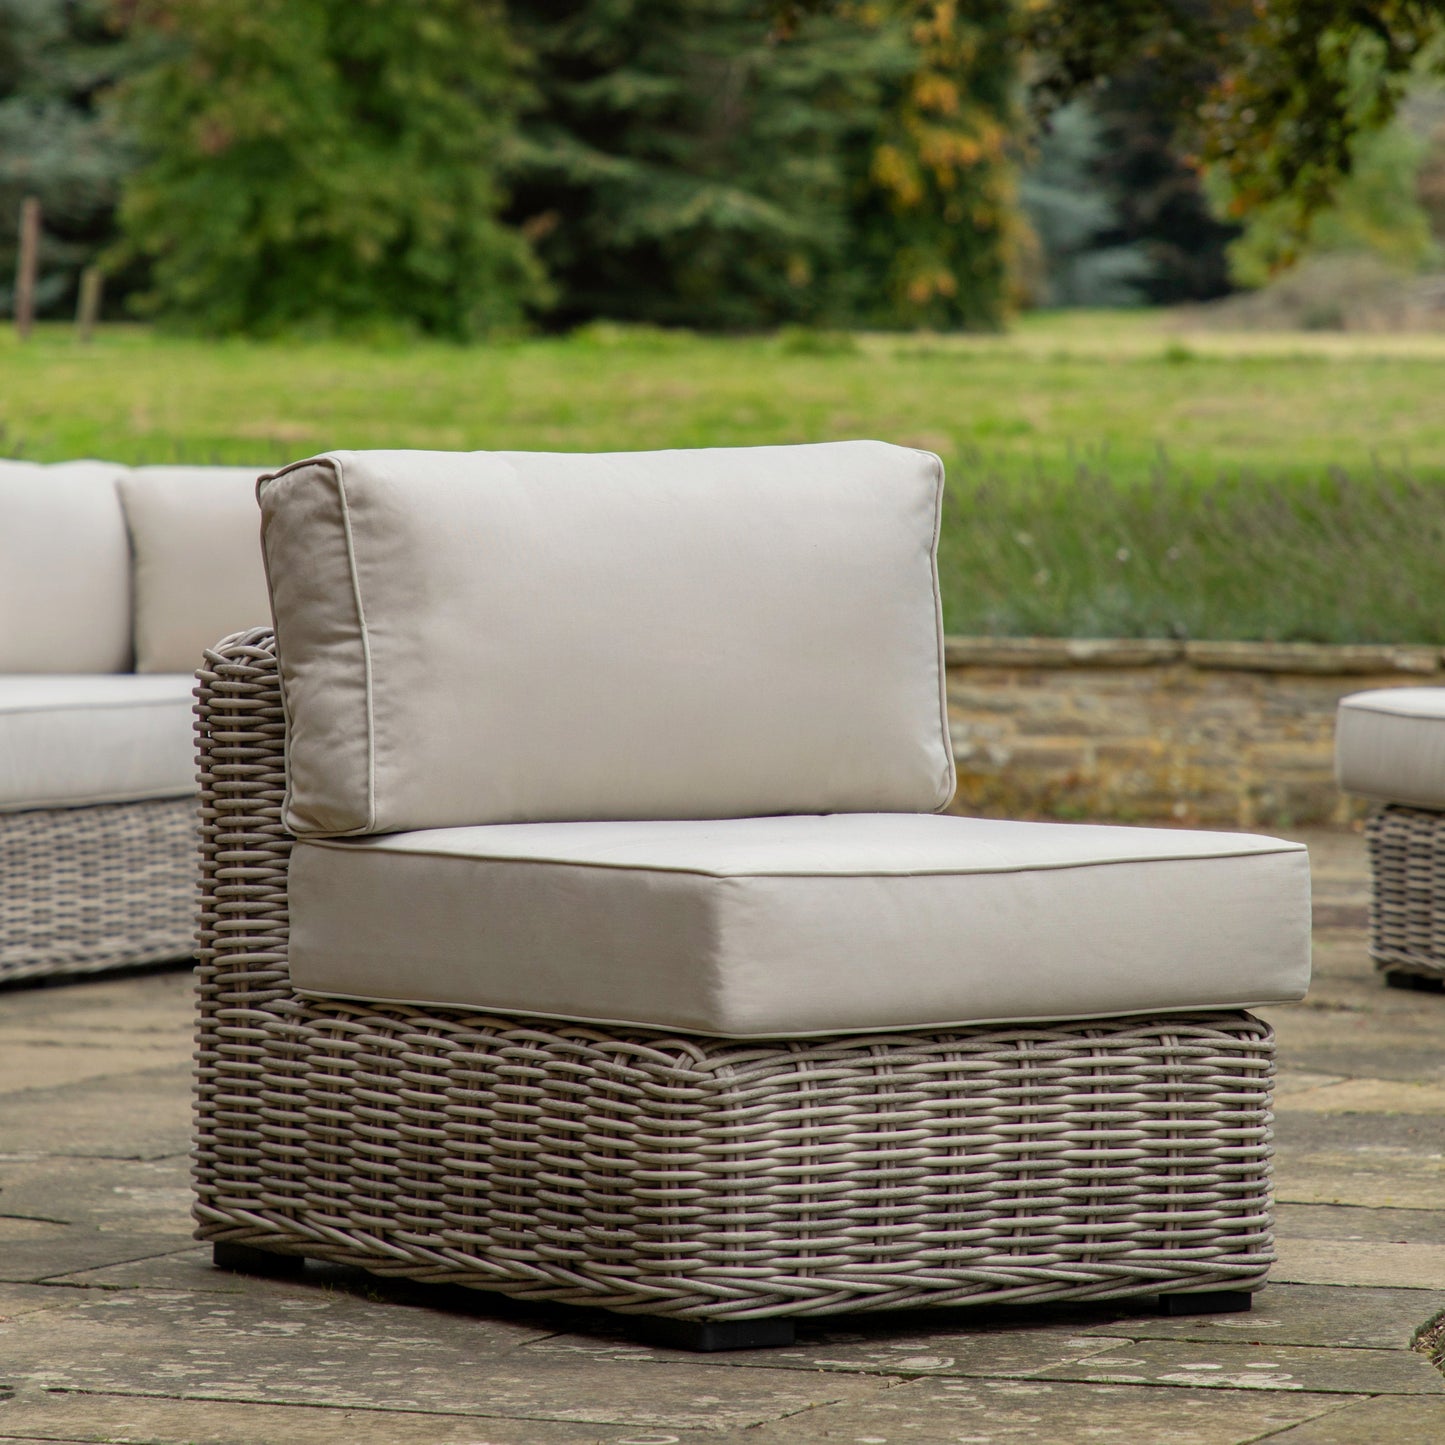 A set of Churchstow 1 Seater Module home furniture from Kikiathome.co.uk sitting on a stone patio.